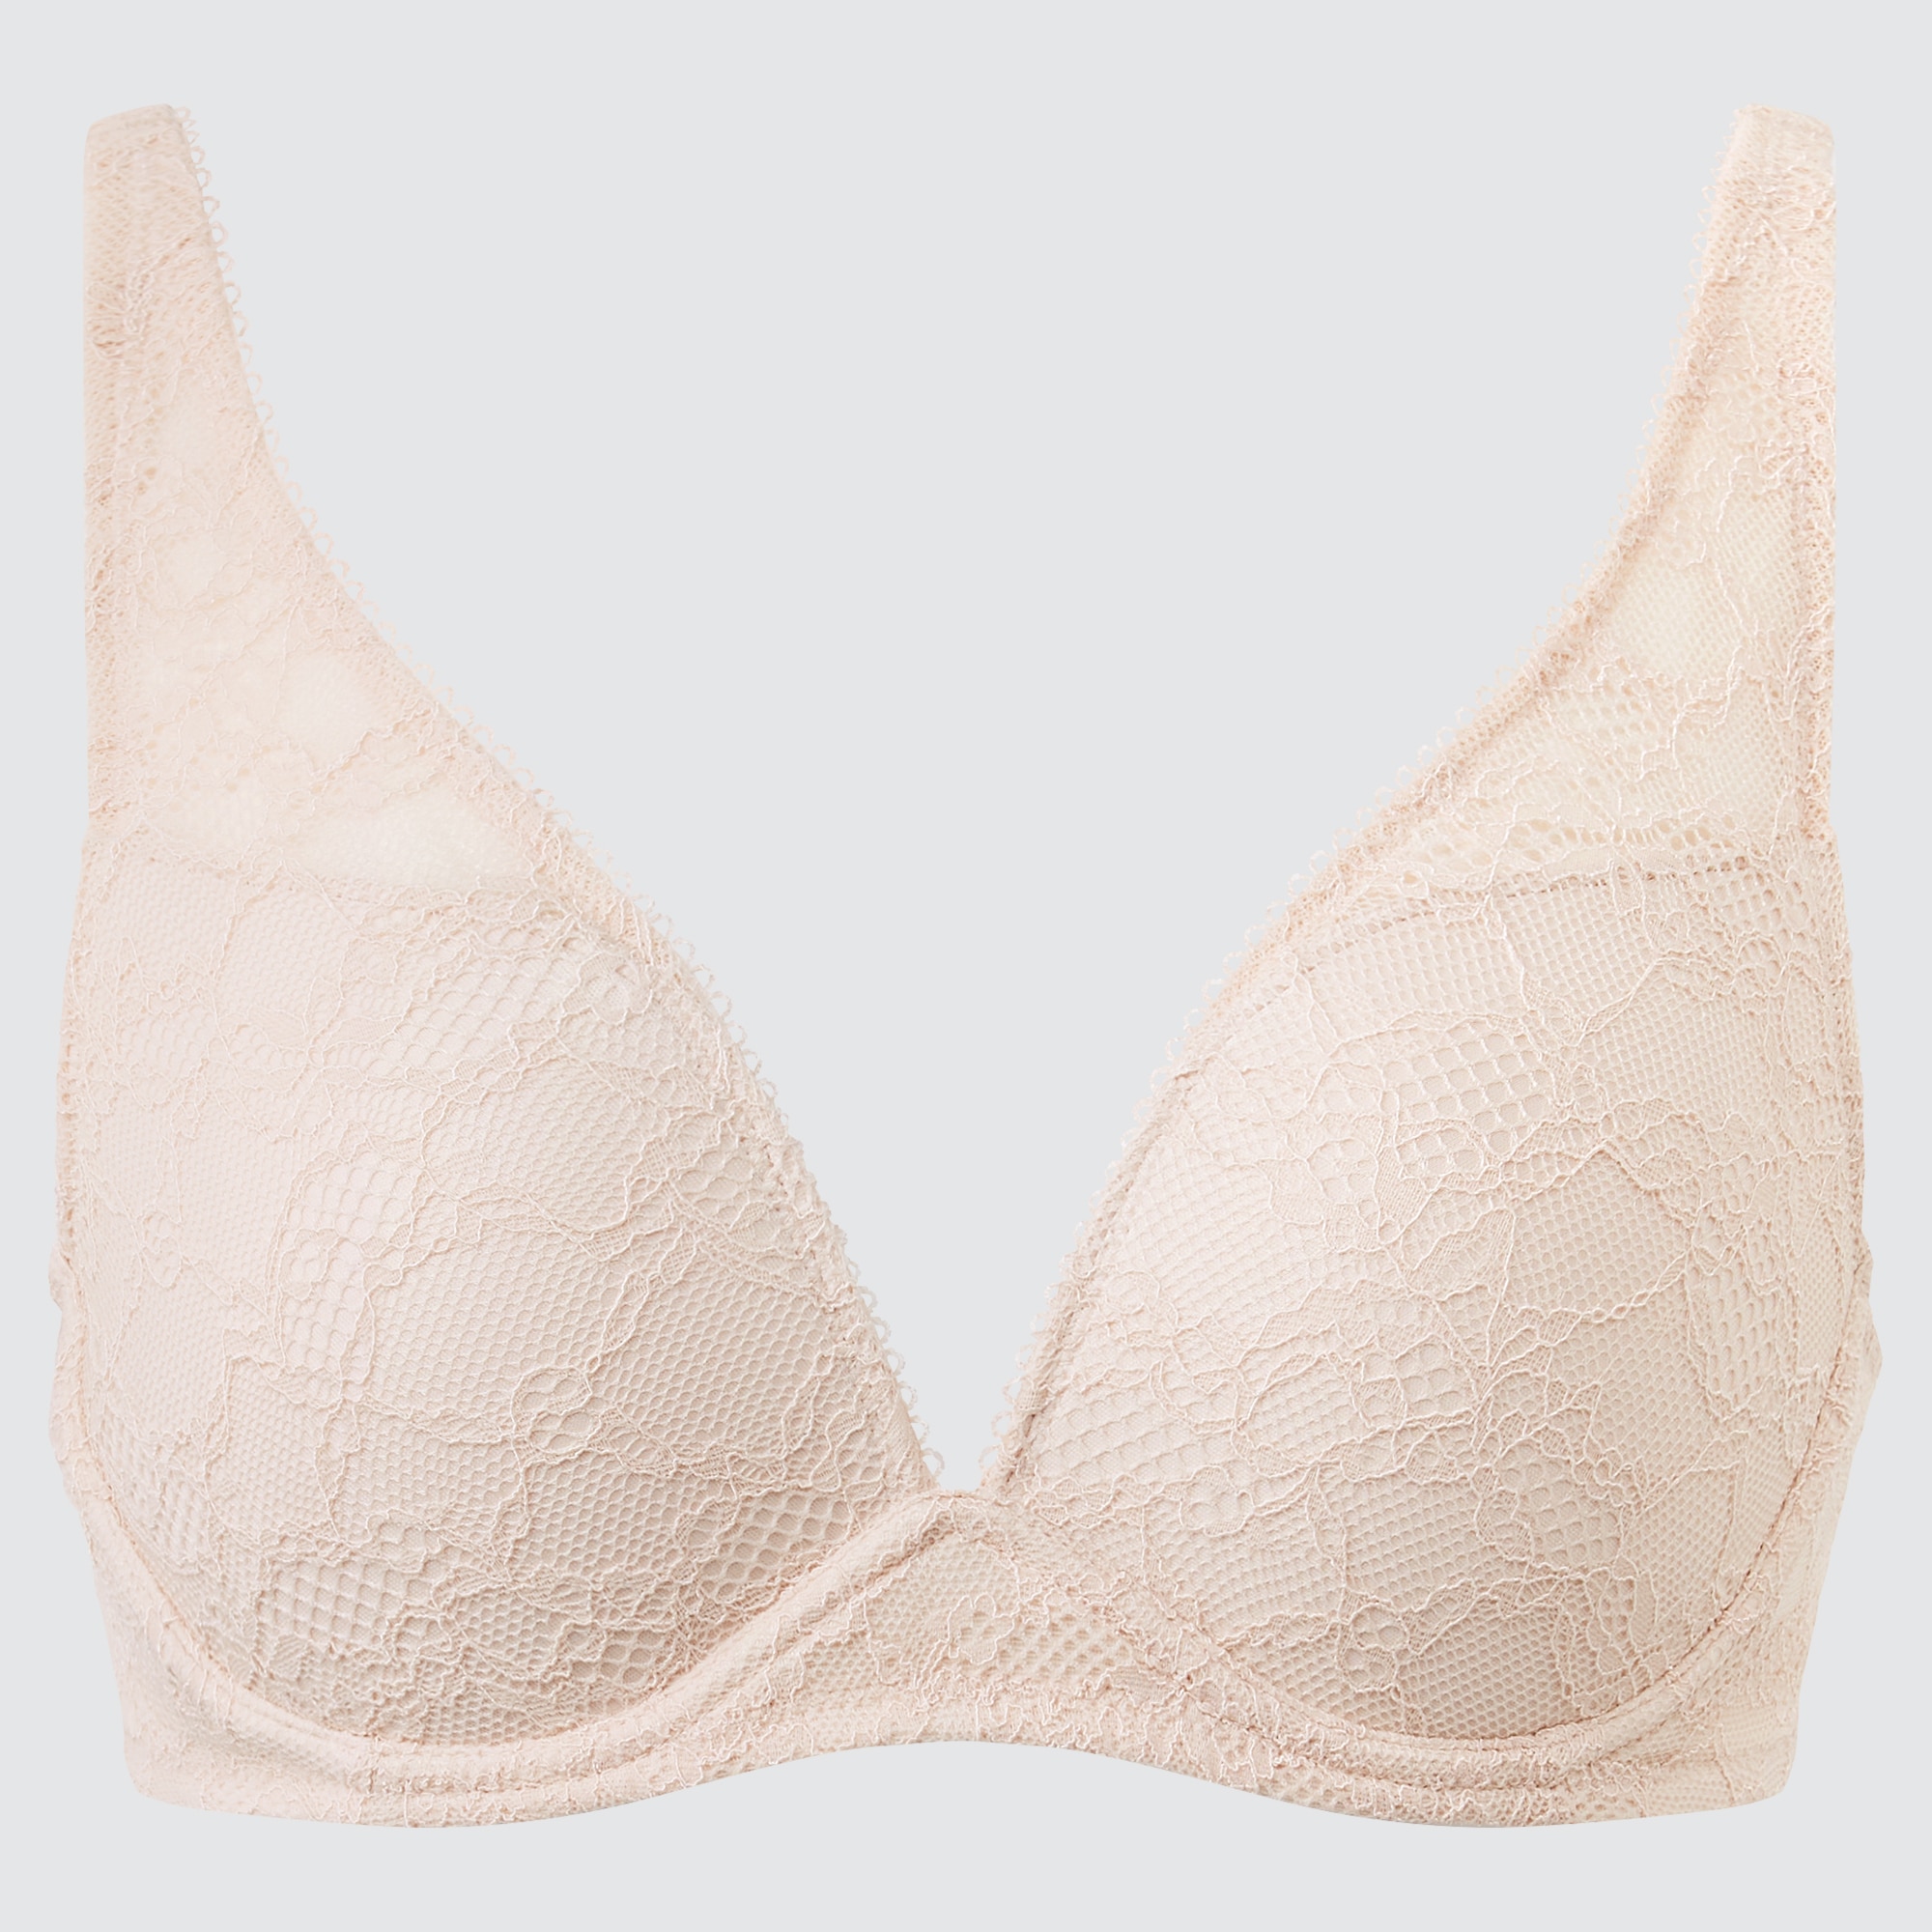 UNIQLO Wireless Bra (Plunging Relax, Lace) | StyleHint